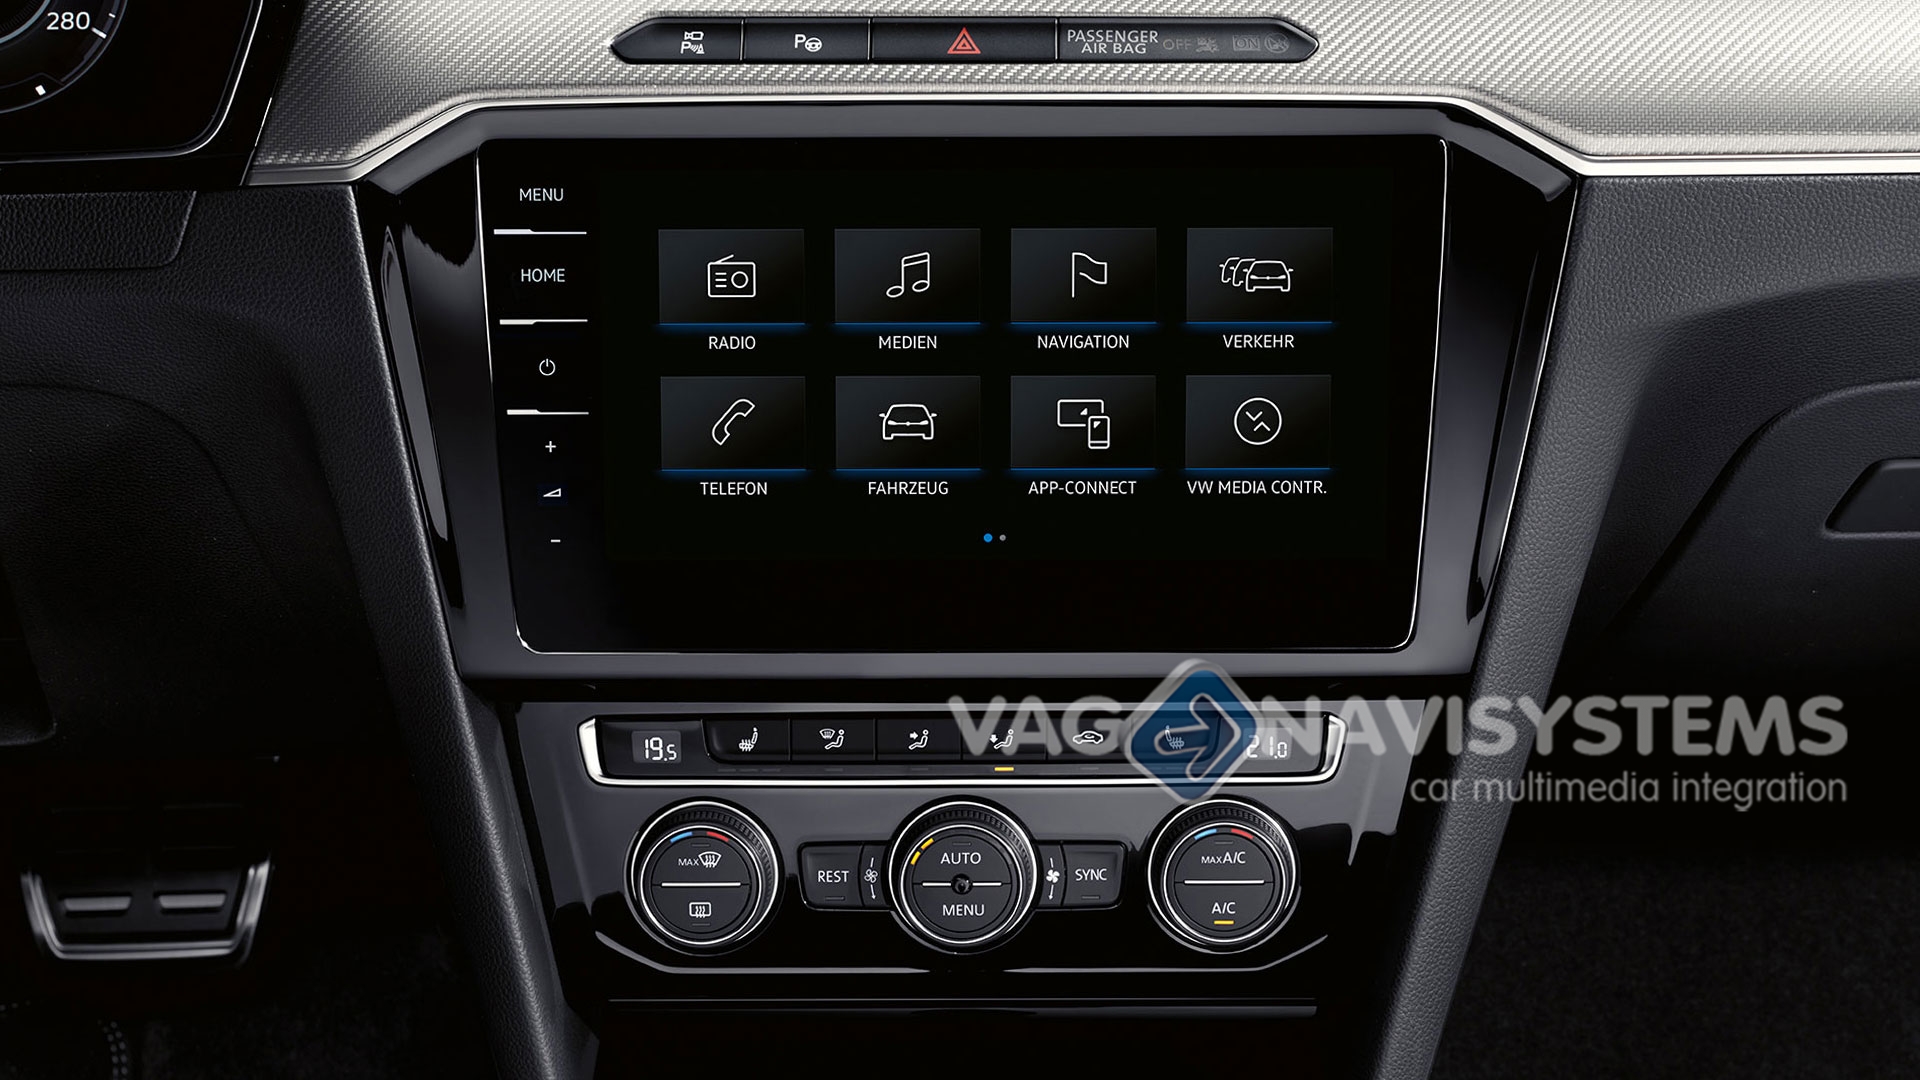 Retrofit kit - VW MIB 2.5 + 9.2 Monitor Discover Pro (maps included at  HDD) Apple Carplay + Android Auto - Novedades